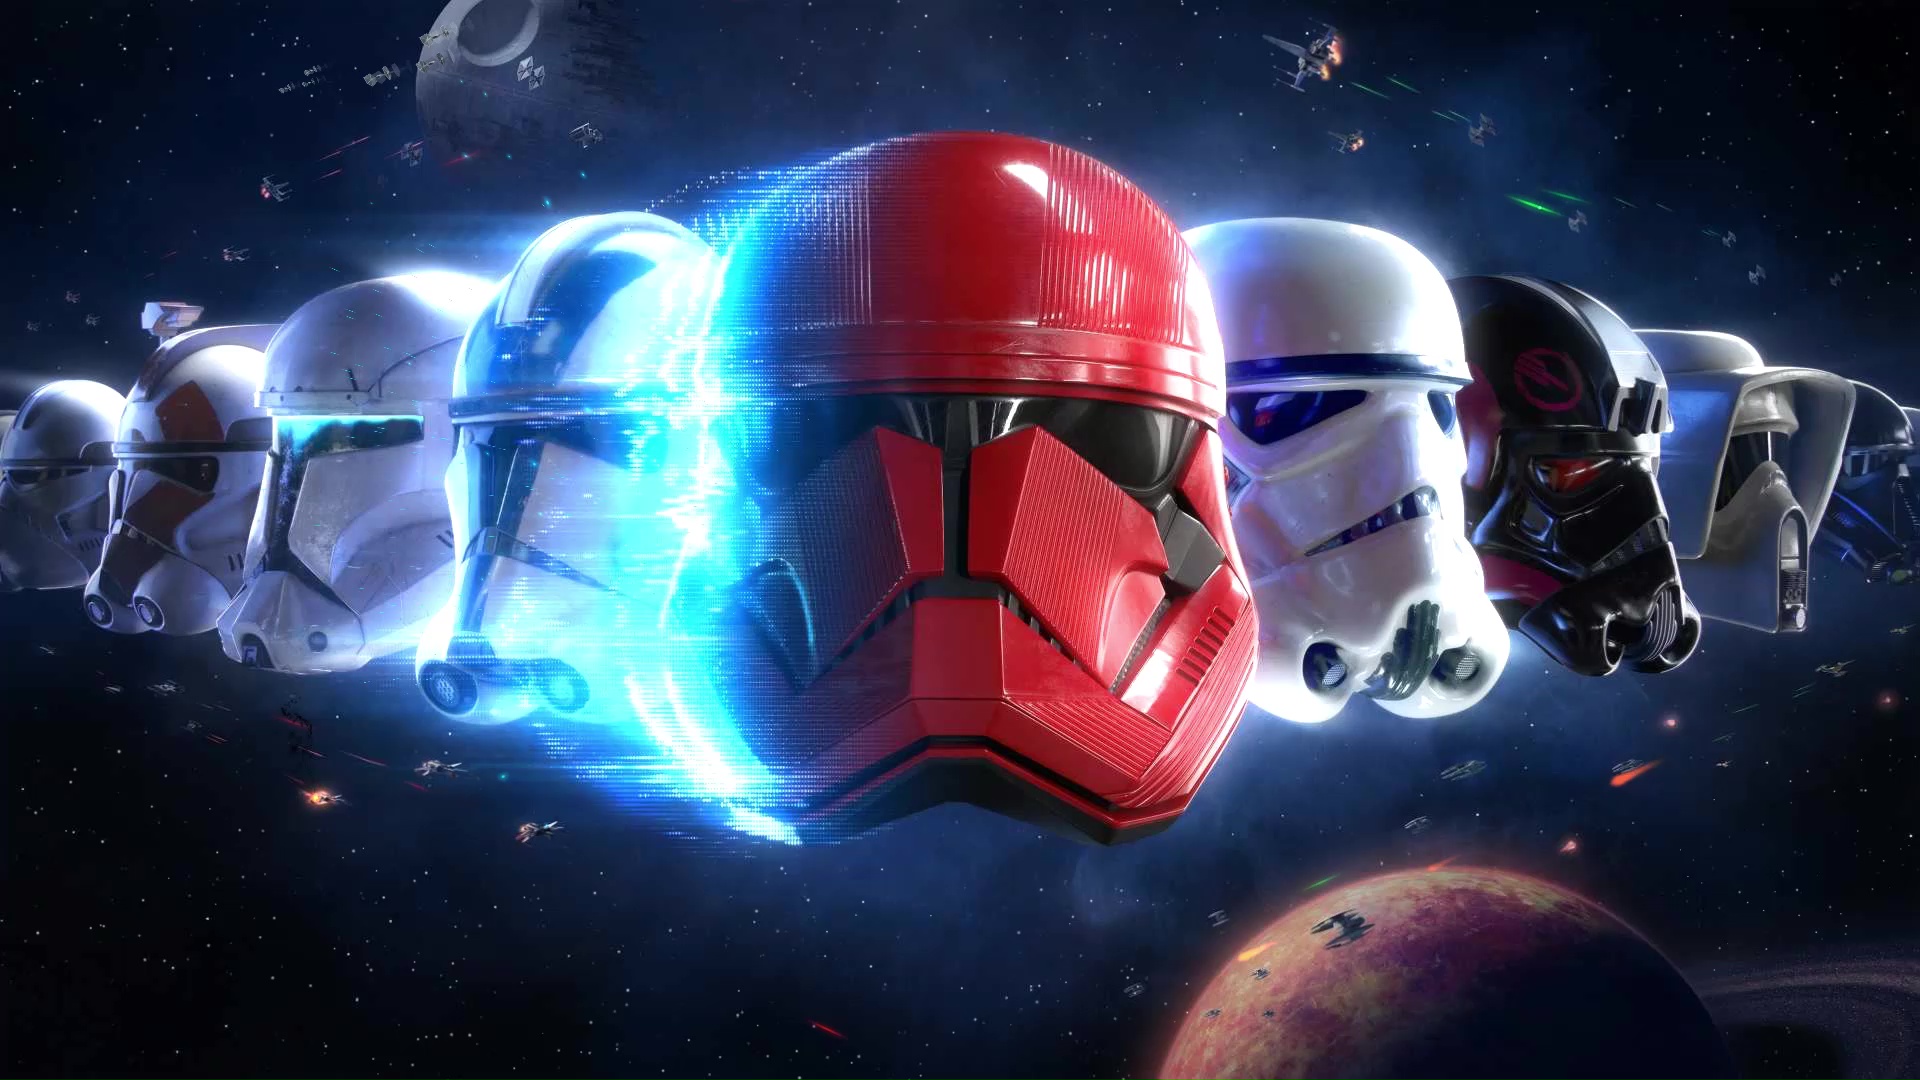 star wars animation wallpaper android free